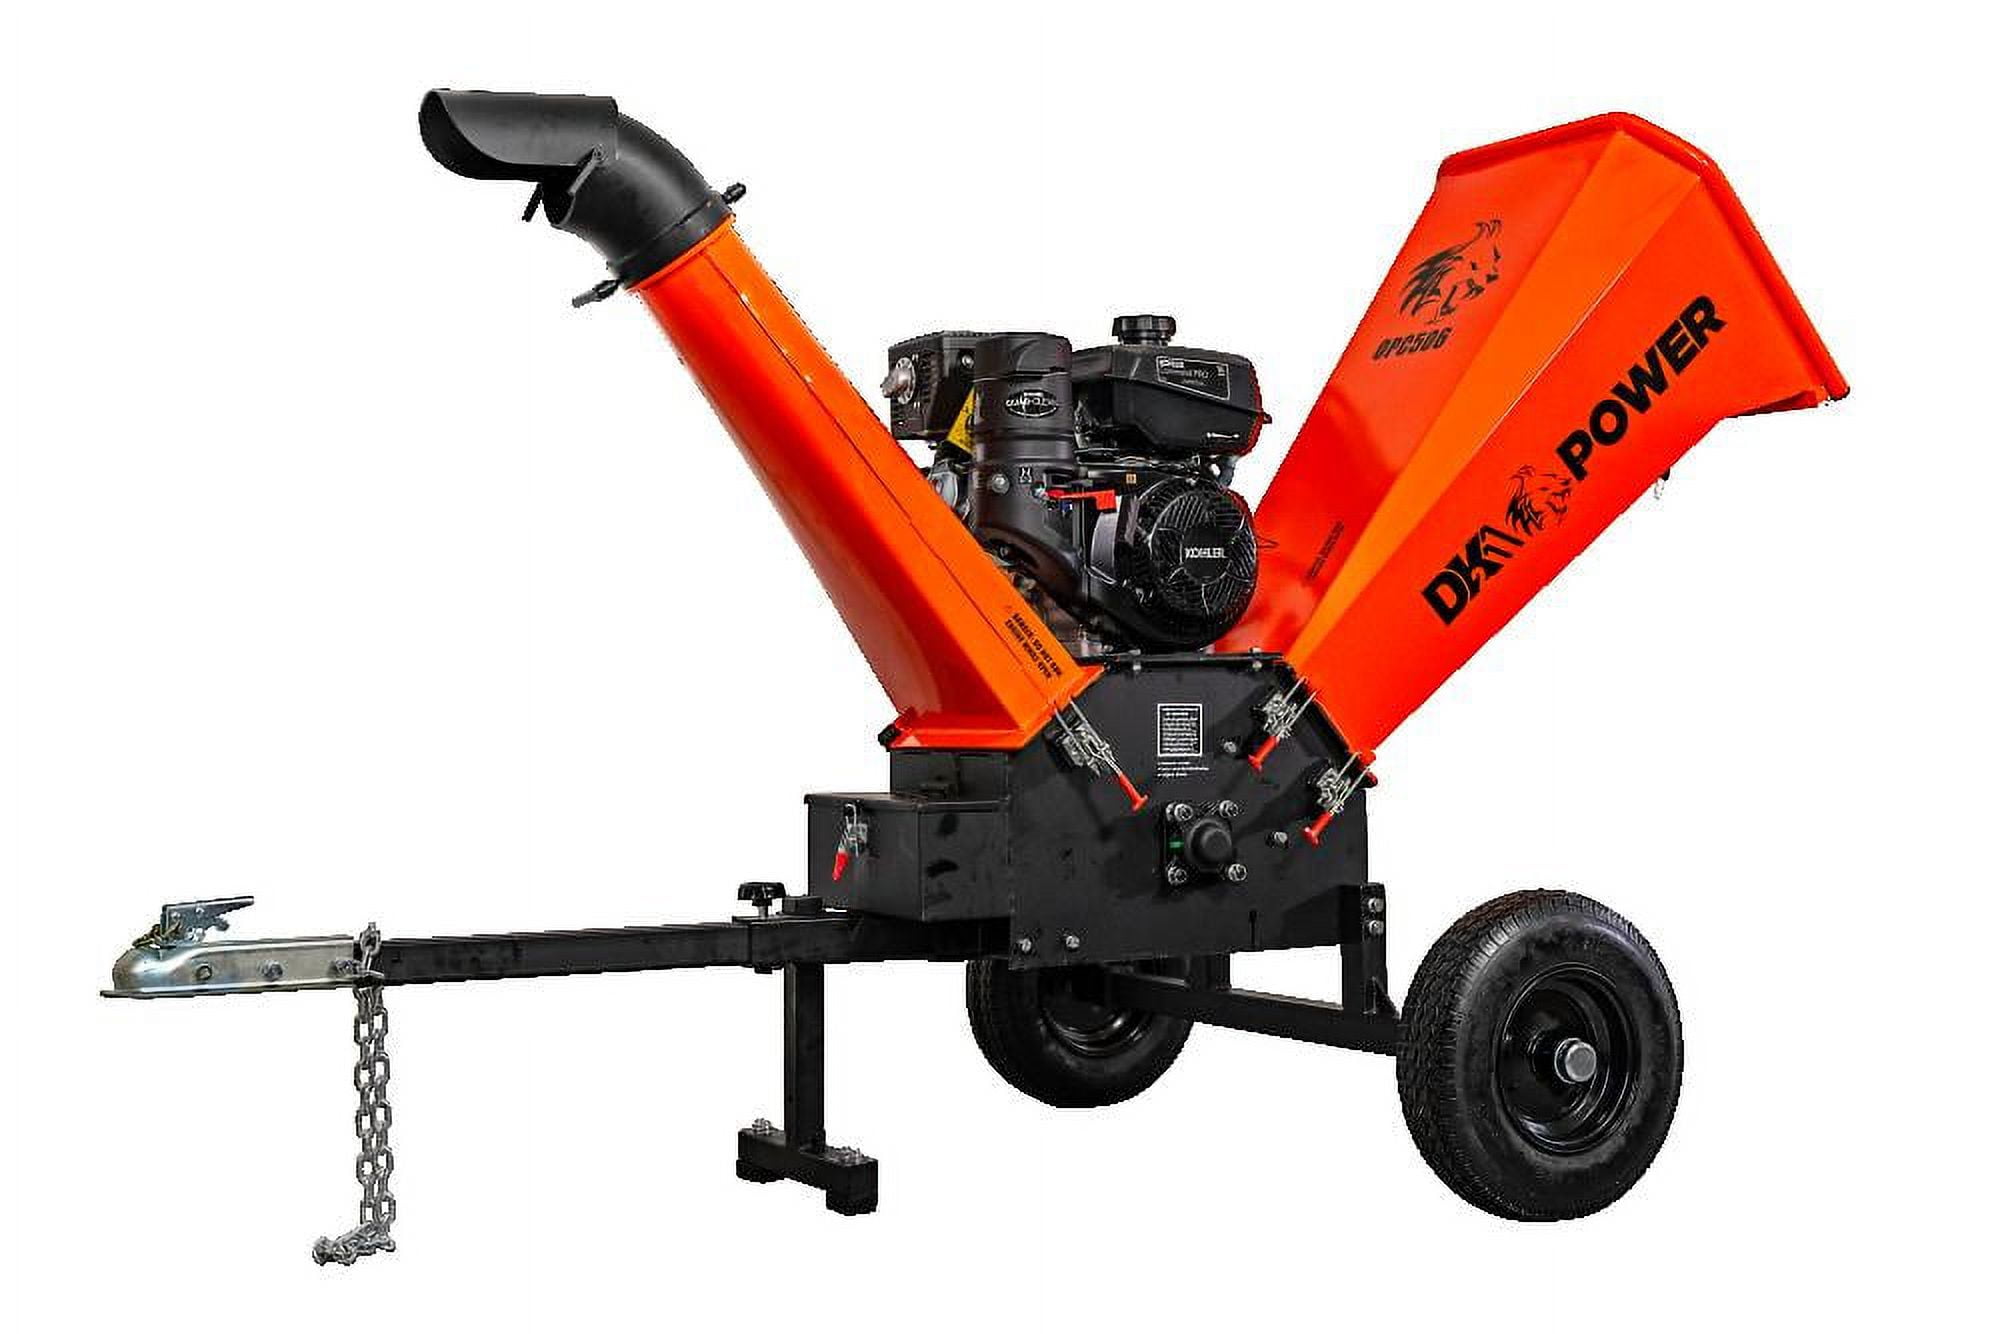 Opc506 6 In. 14hp Cyclonic Chipper Shredder With Kohler Ch440 Command Pro Commercial Gas Engine